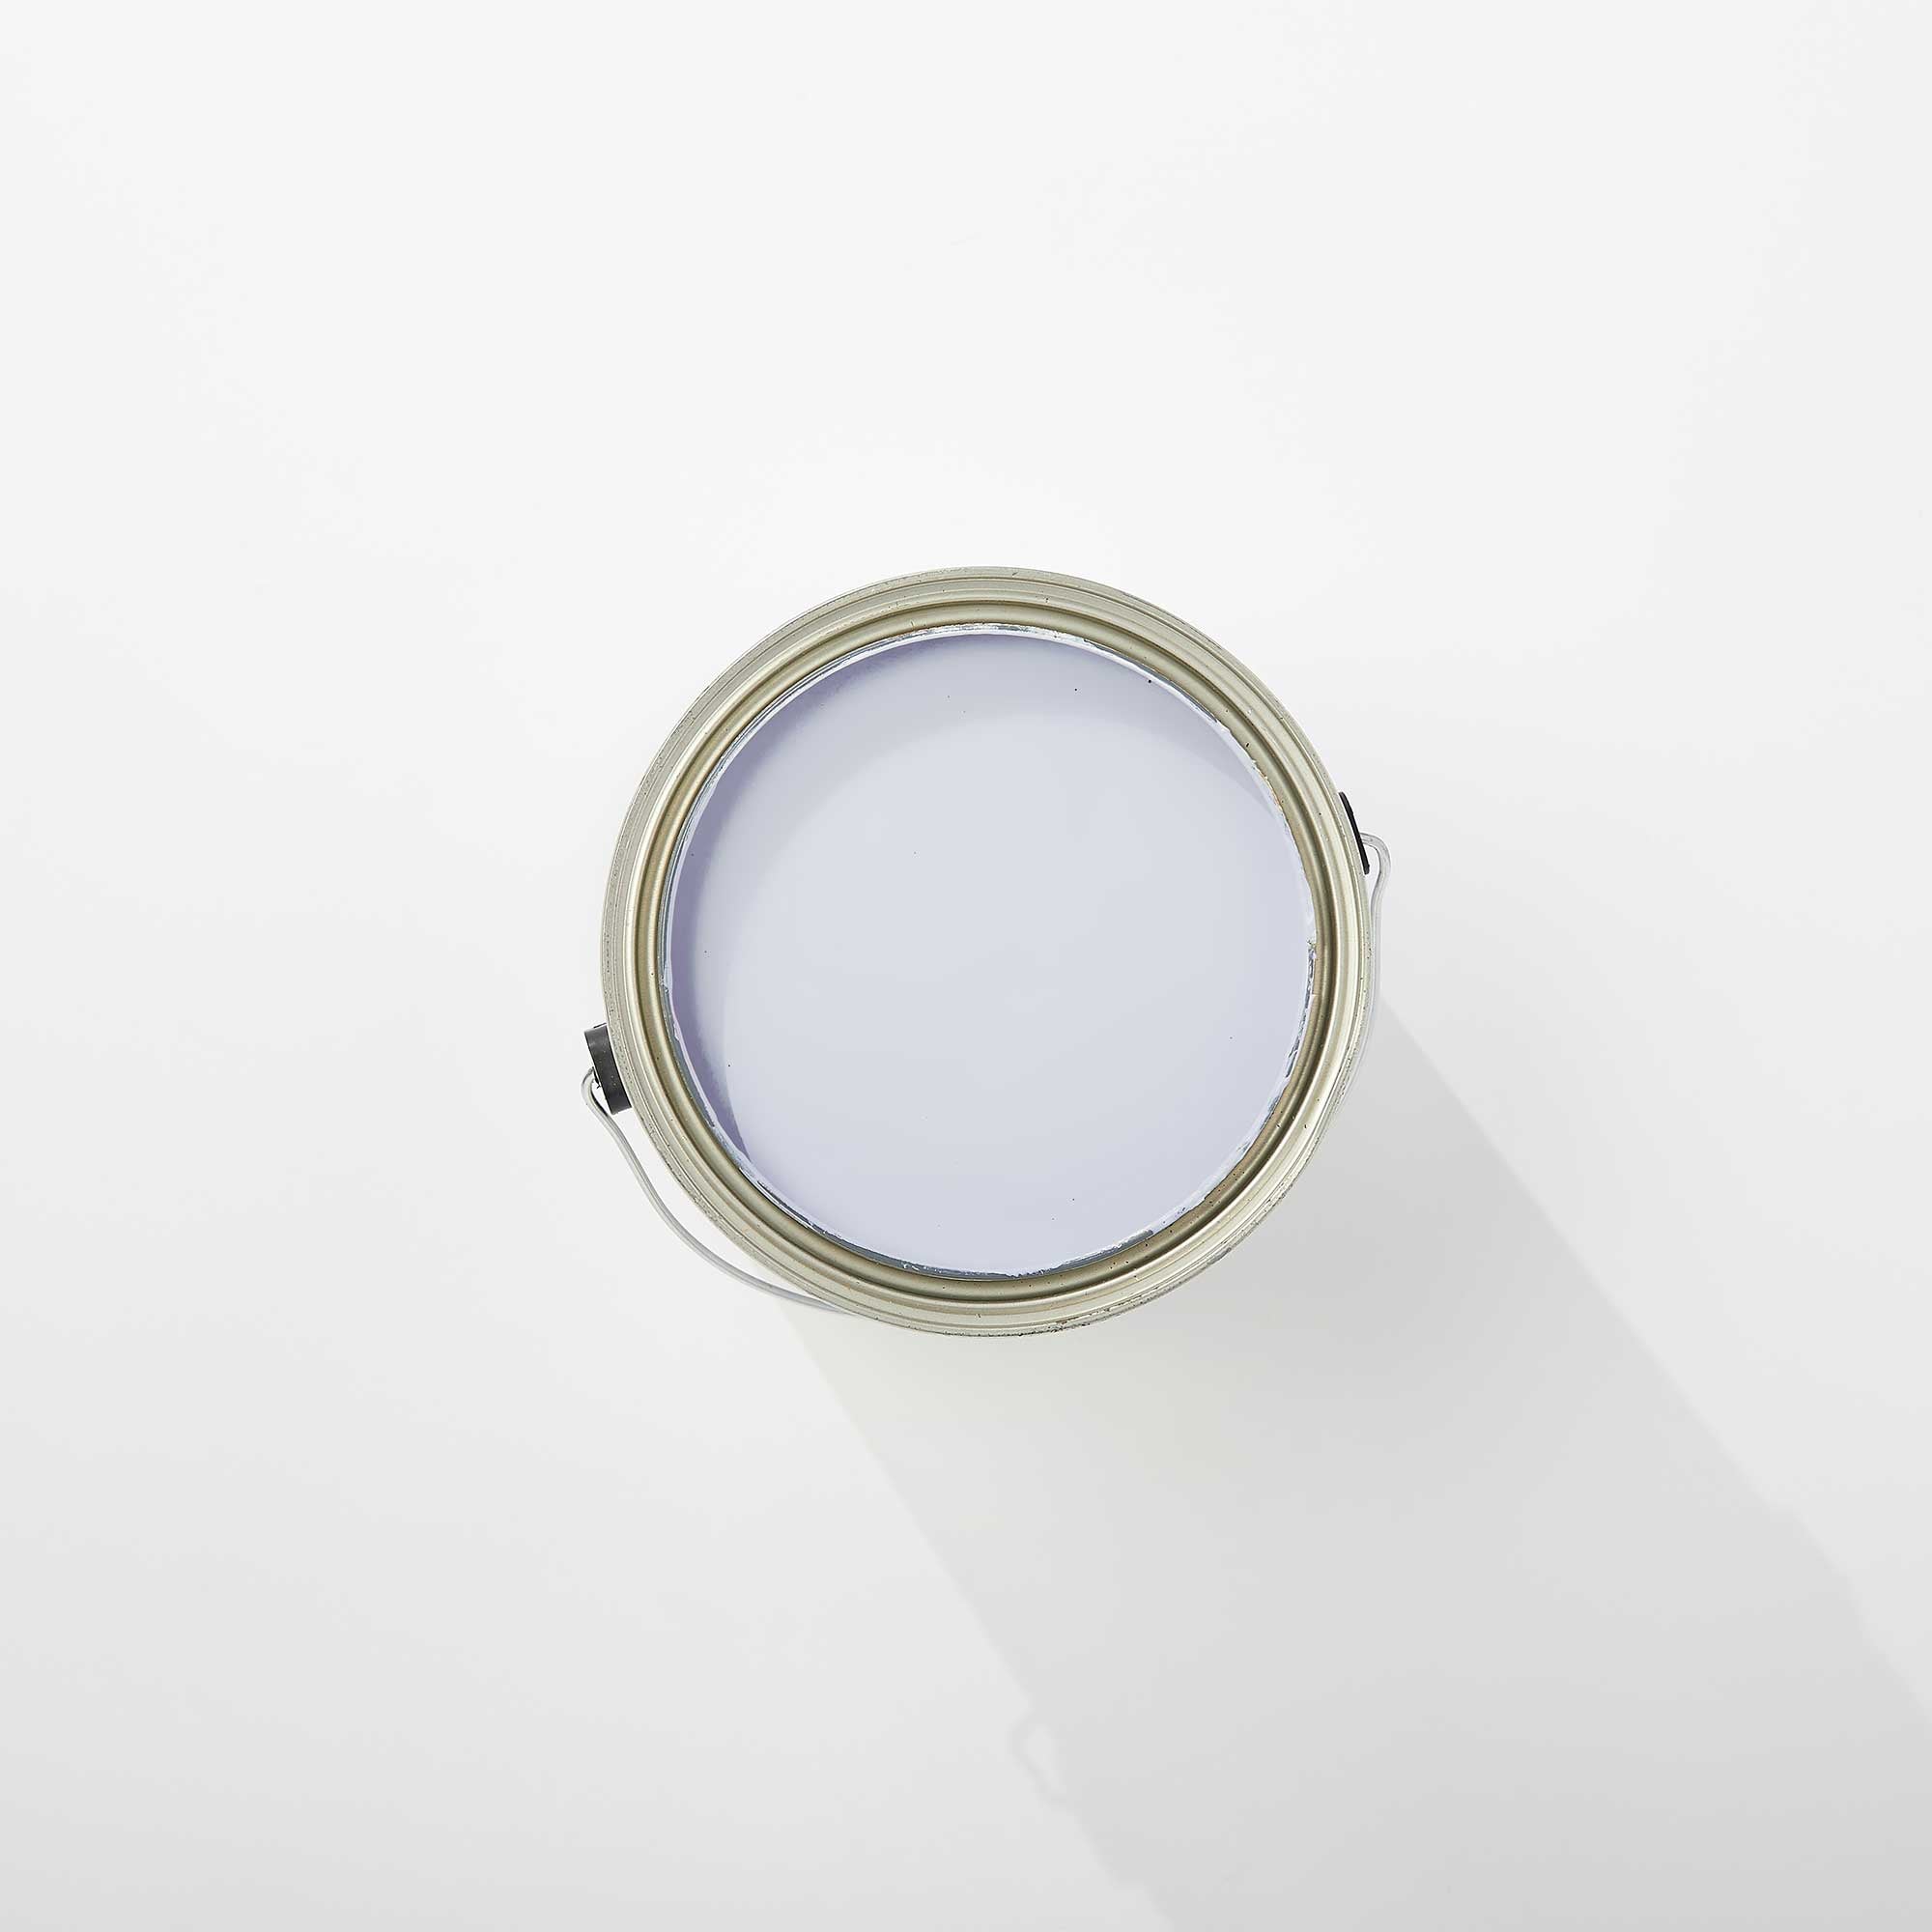 Periwinkle | Wall & Trim Paint